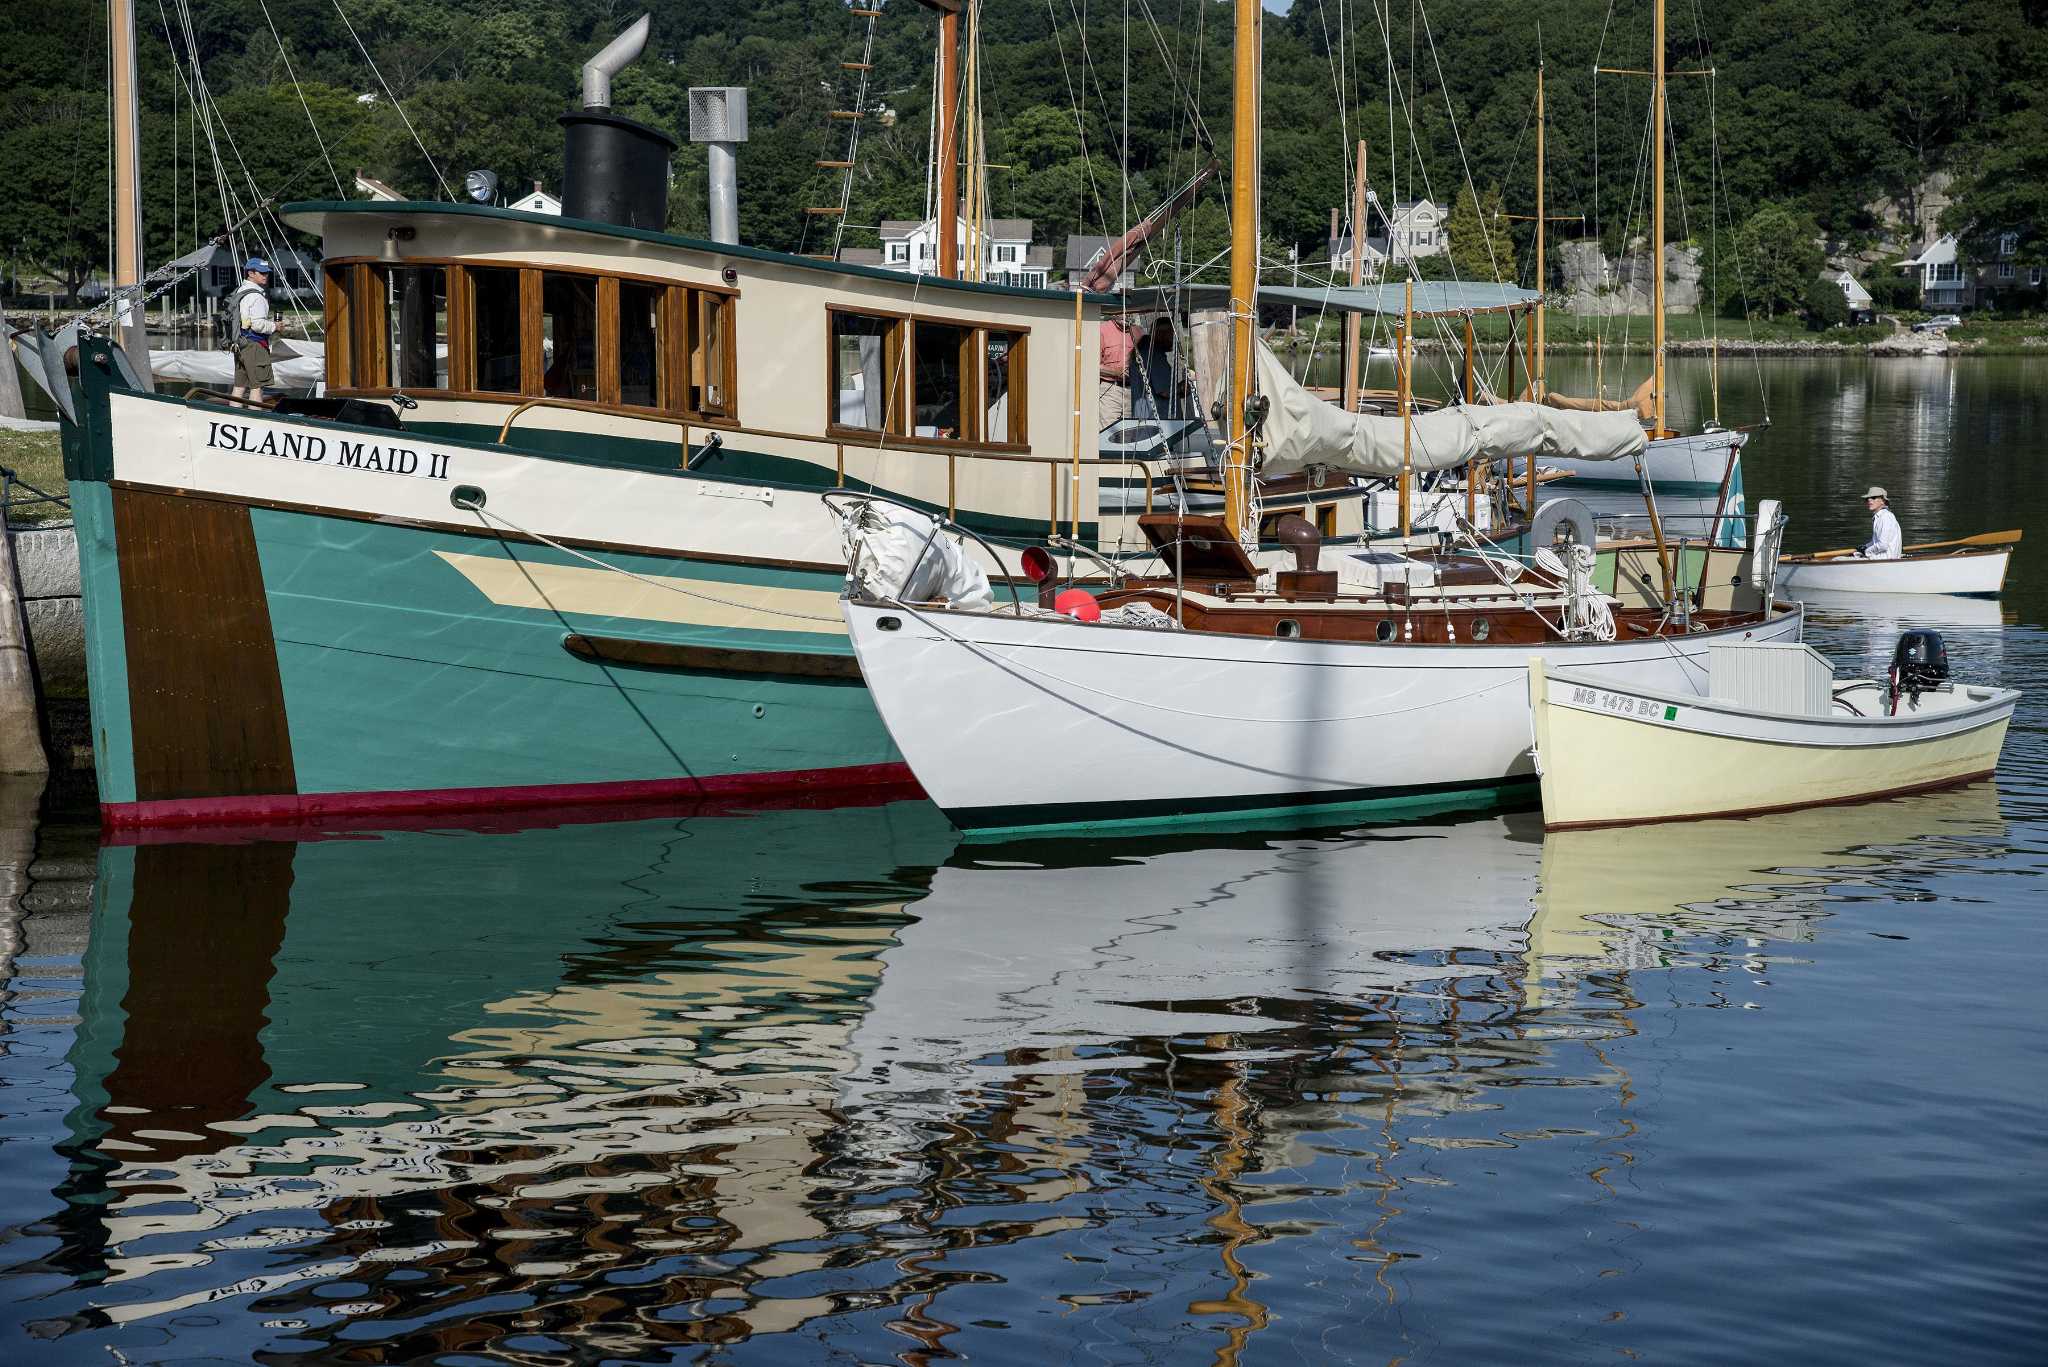 WoodenBoat Show returns to Mystic Seaport Museum